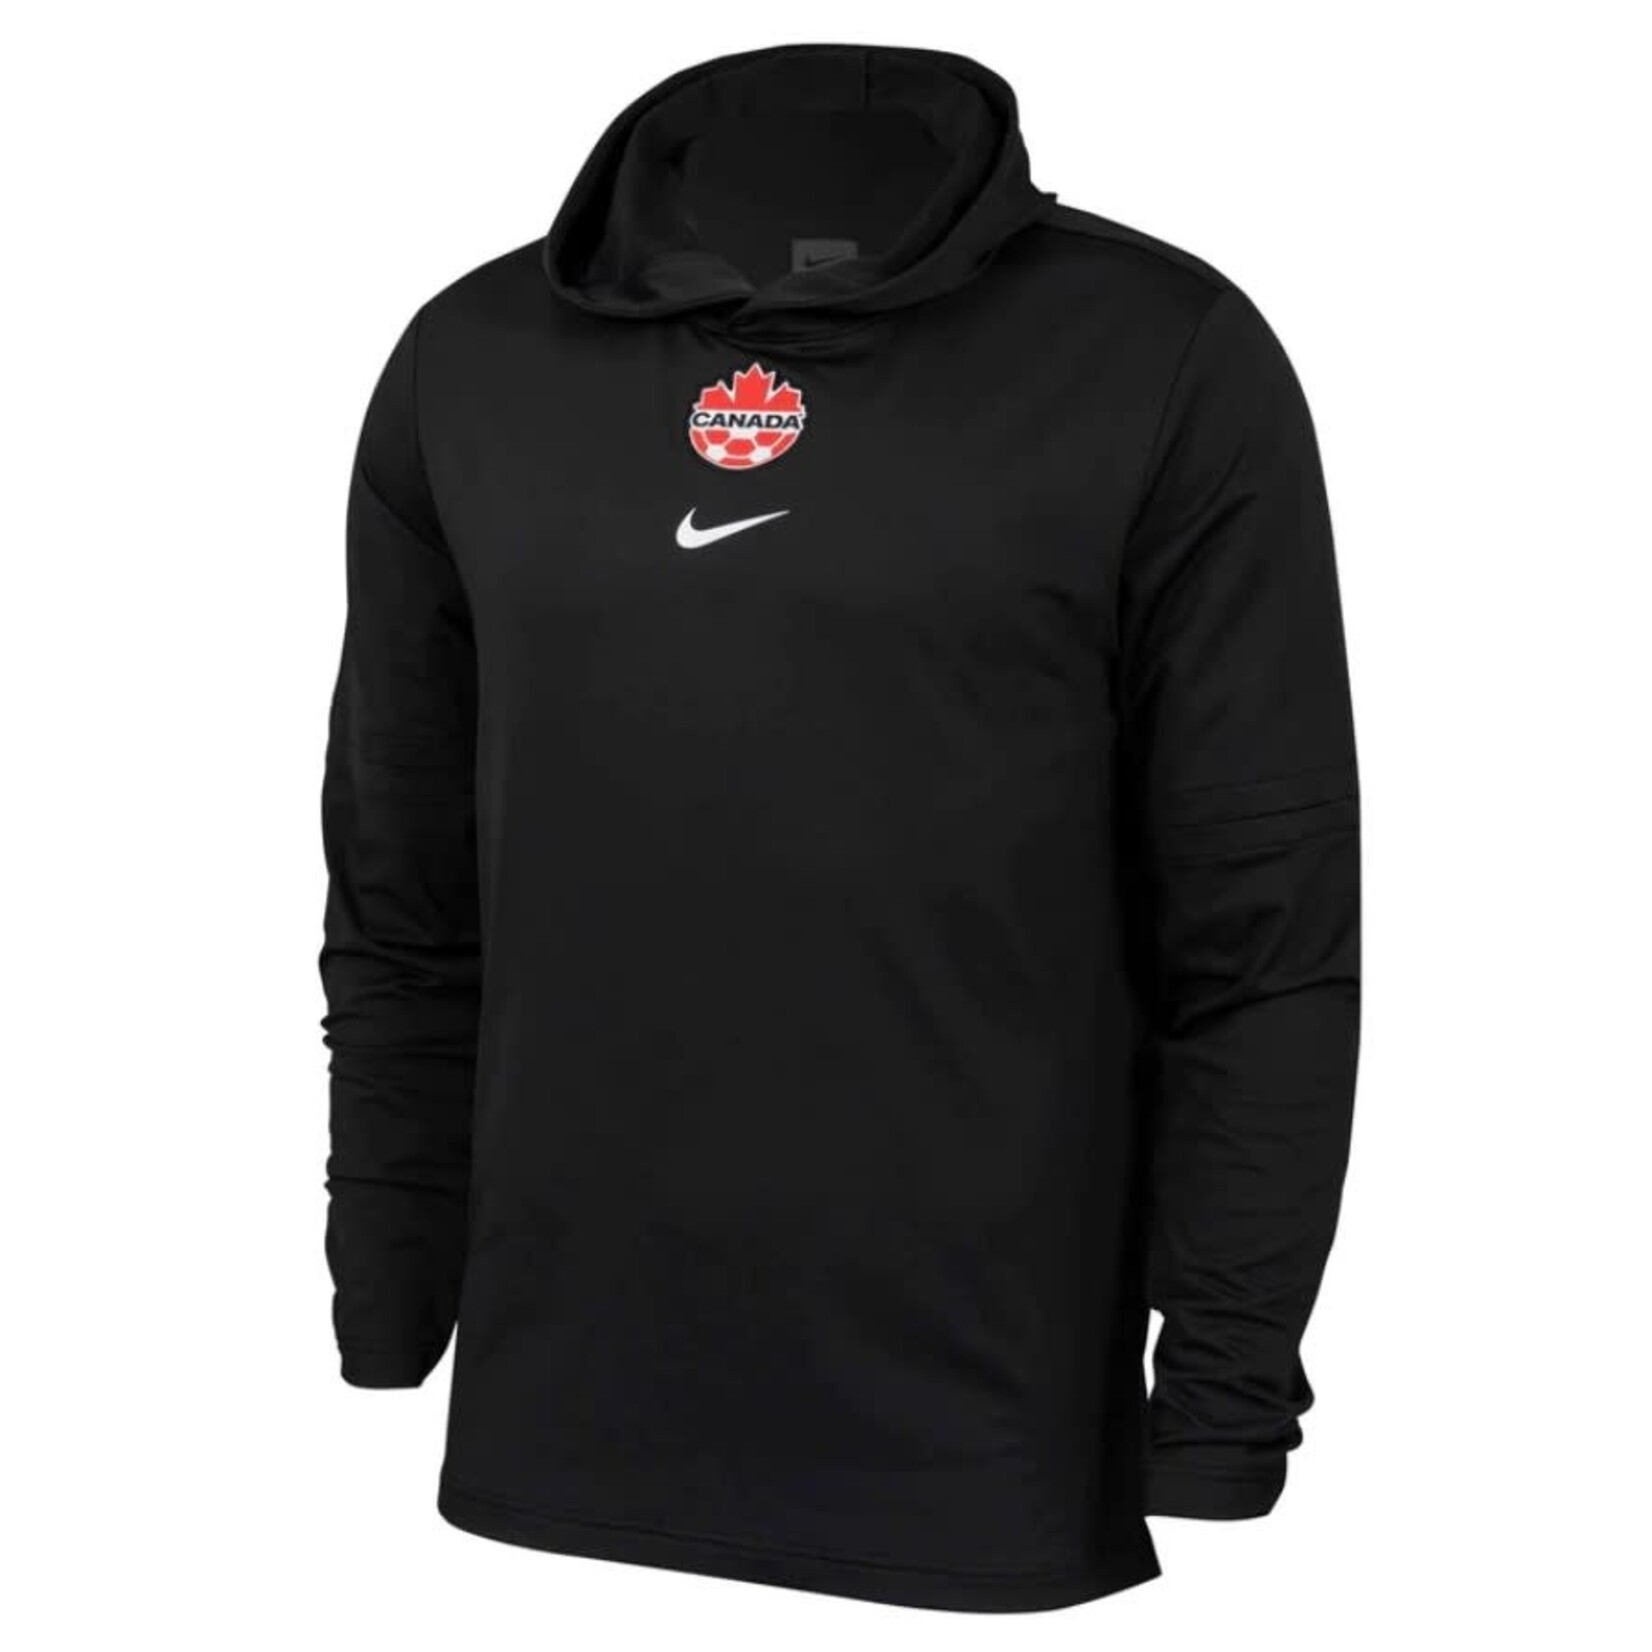 Nike Canada Soccer Hooded Player Top - ZMDV6788D 010